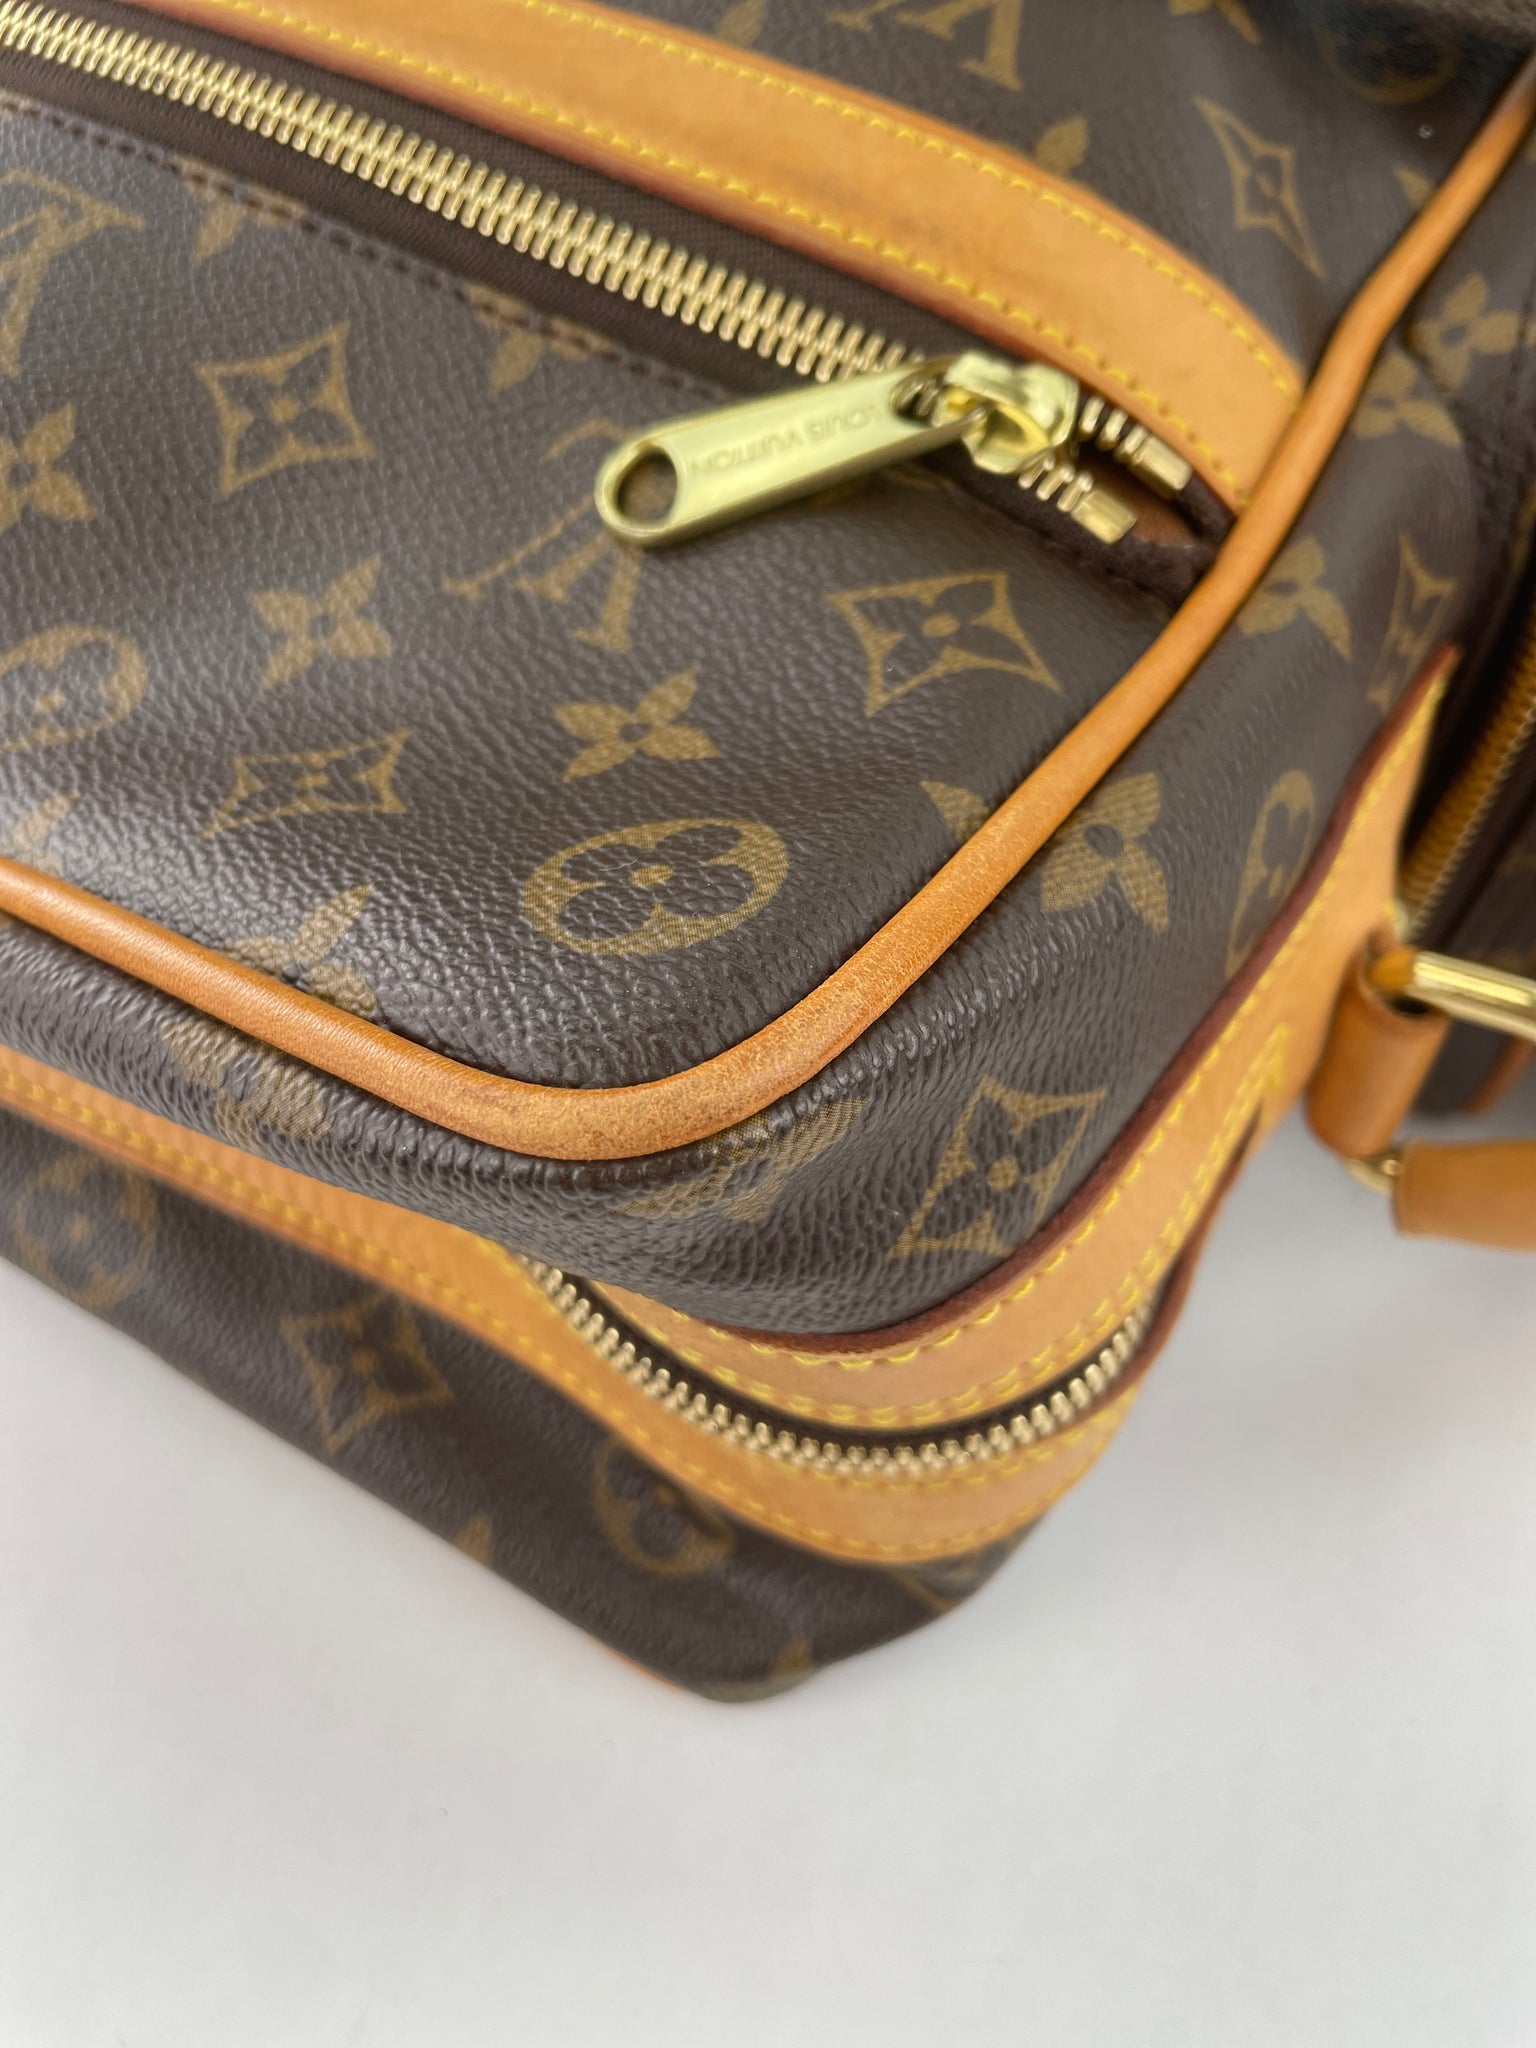 RUSH SALE!!! PRELOVED Original LV Saumur 43 Messenger Bag Monogram- Good  Condition>>> PLEASE READ Bio and Product details, Men's Fashion, Bags, Belt  bags, Clutches and Pouches on Carousell